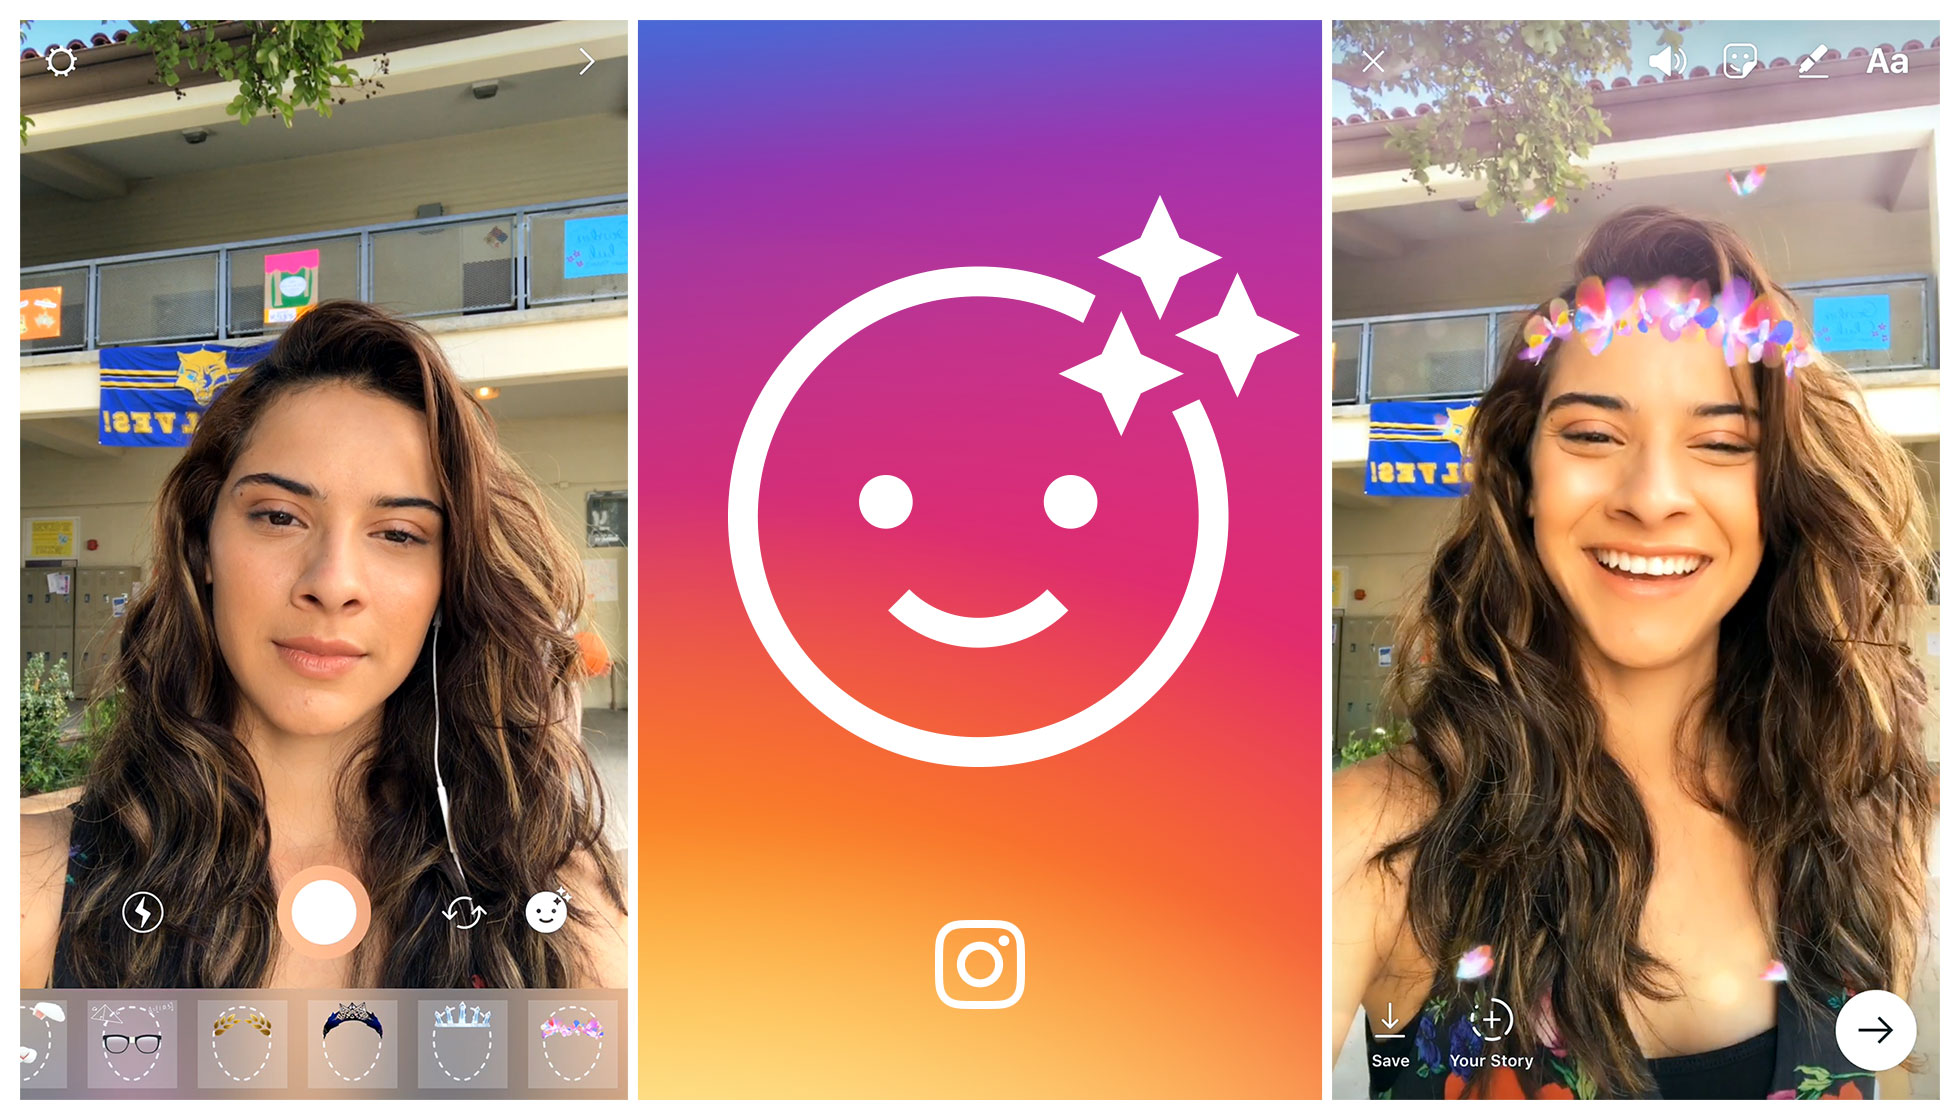 Instagram launches selfie filters, copying the last big Snapchat feature |  TechCrunch